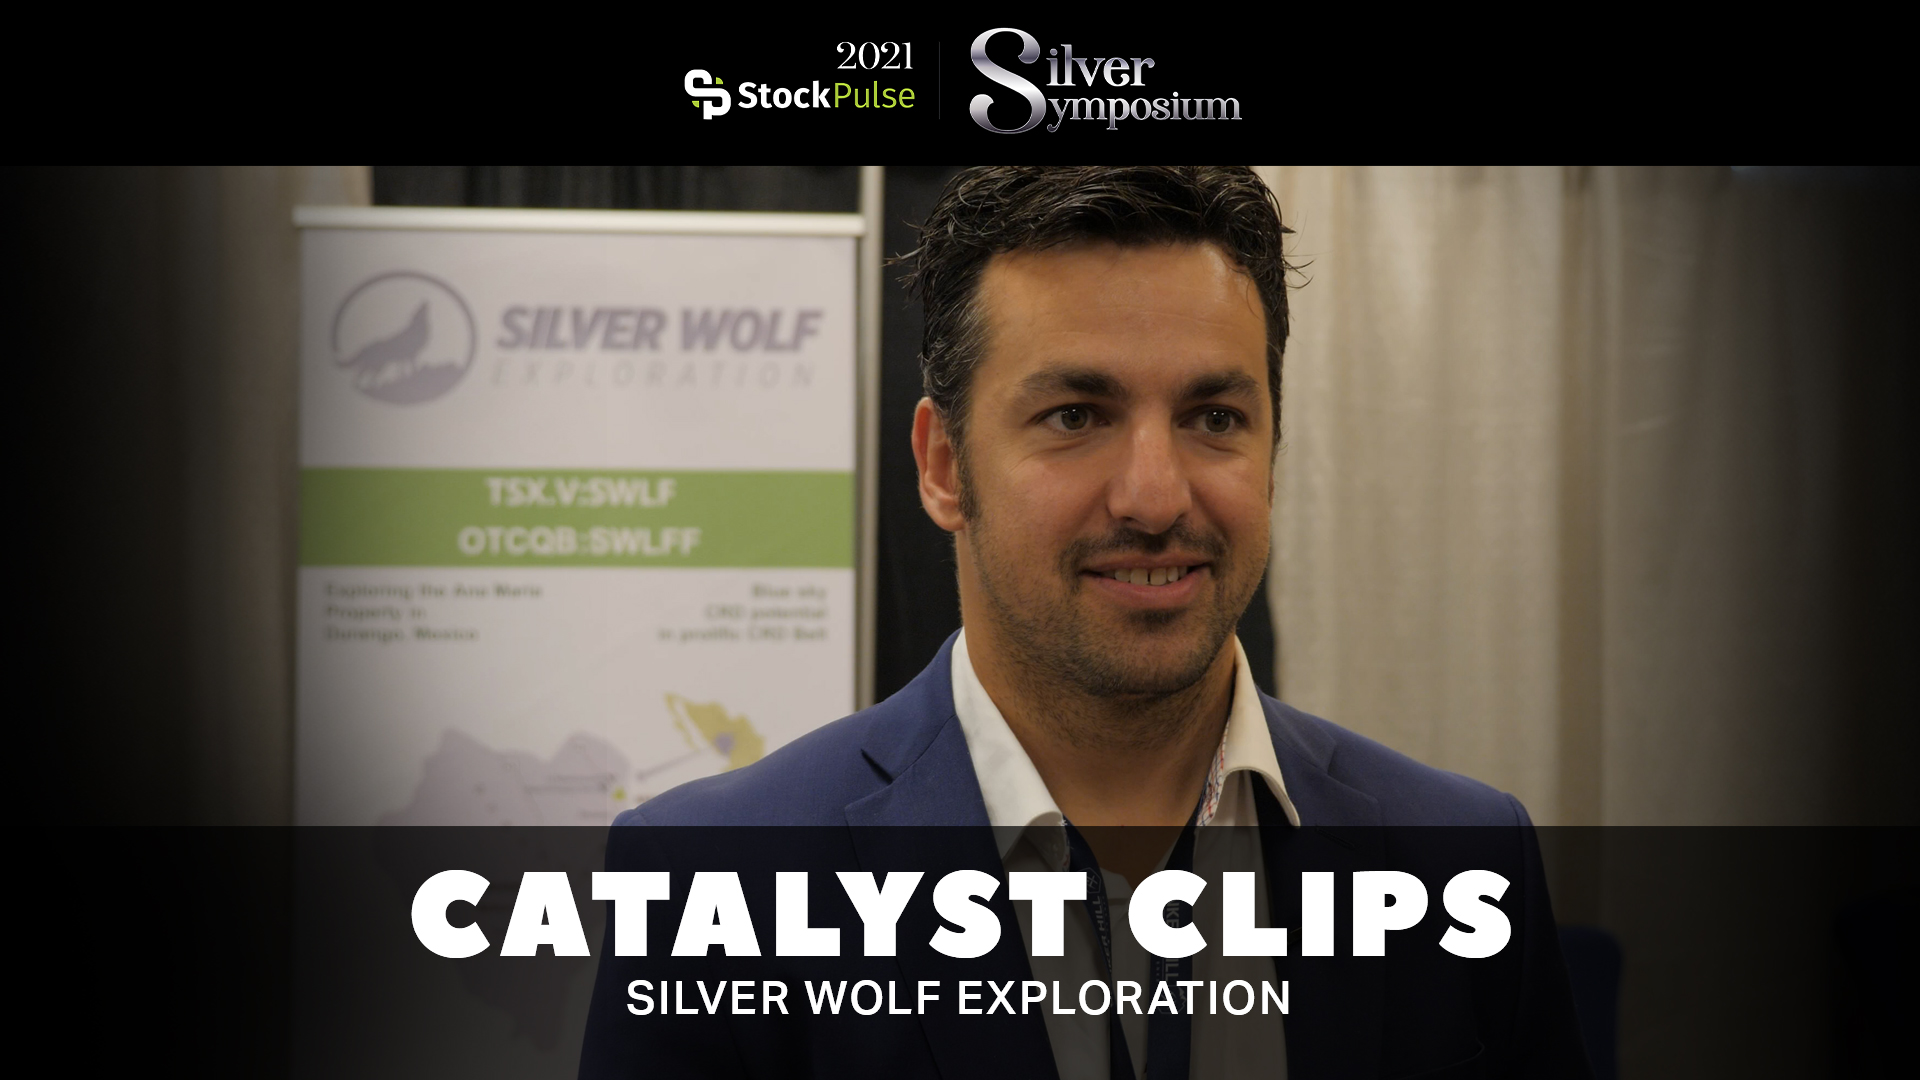 2021 StockPulse Silver Symposium Catalyst Clips | Peter Latta of Silver Wolf Exploration